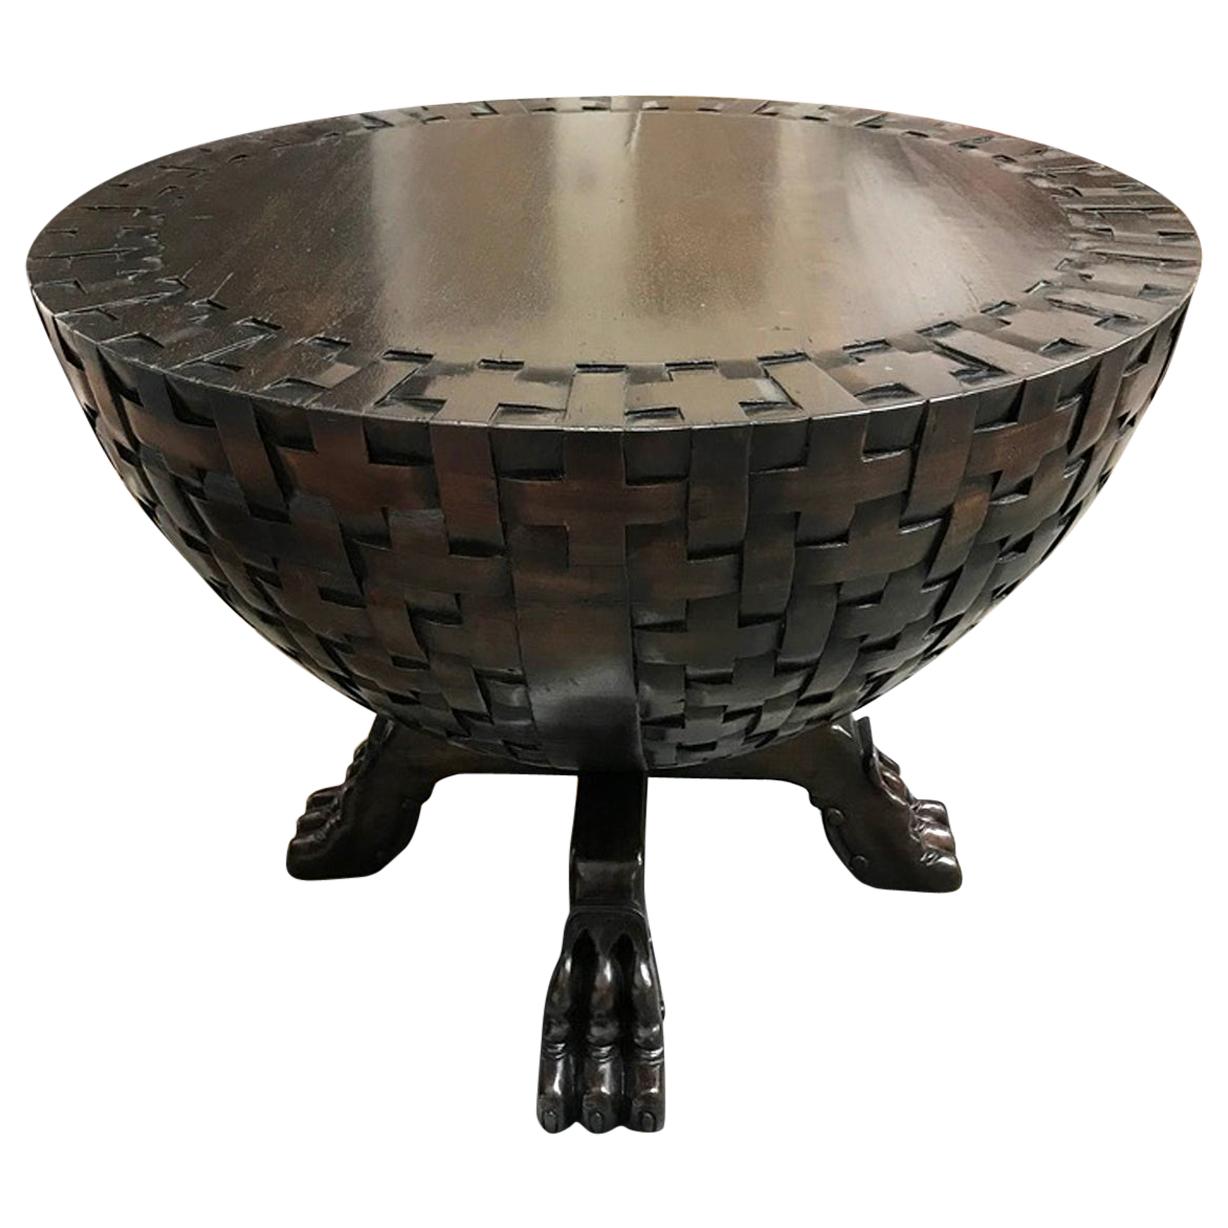 Custom Hand Carved Basketweave Table by Dos Gallos Studio For Sale